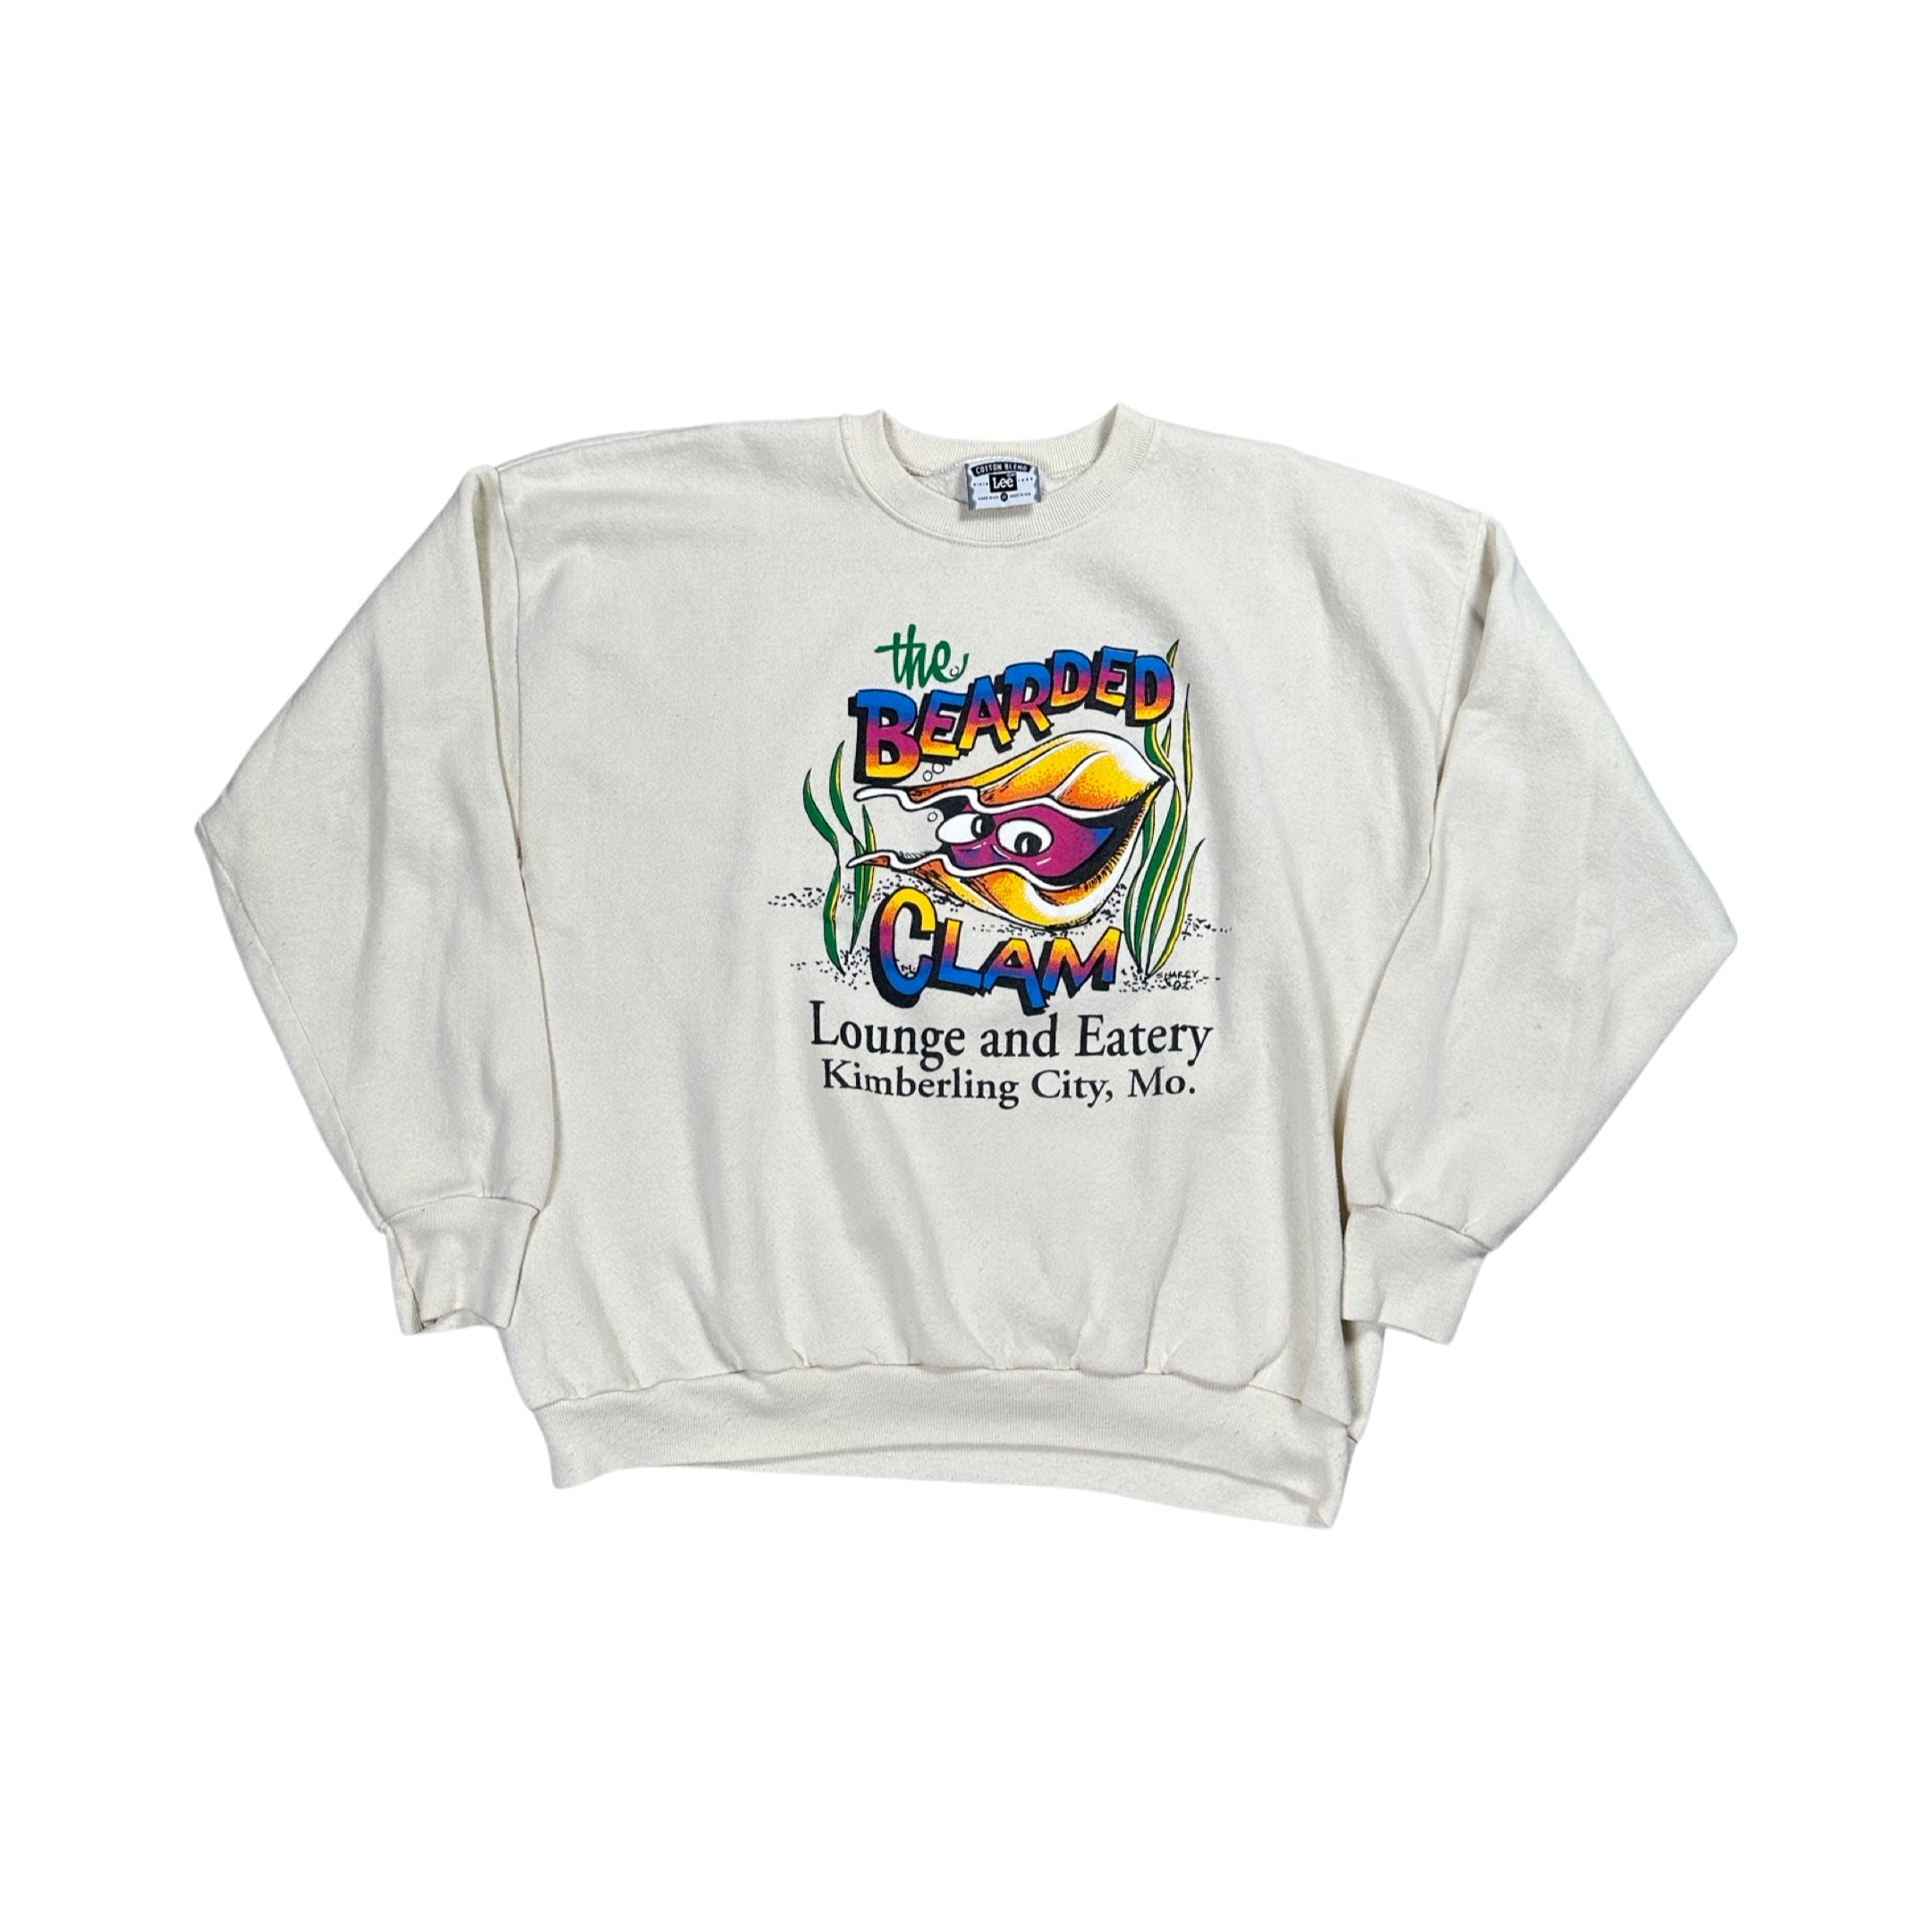 The Bearded Clam 90s Sweater (XL)